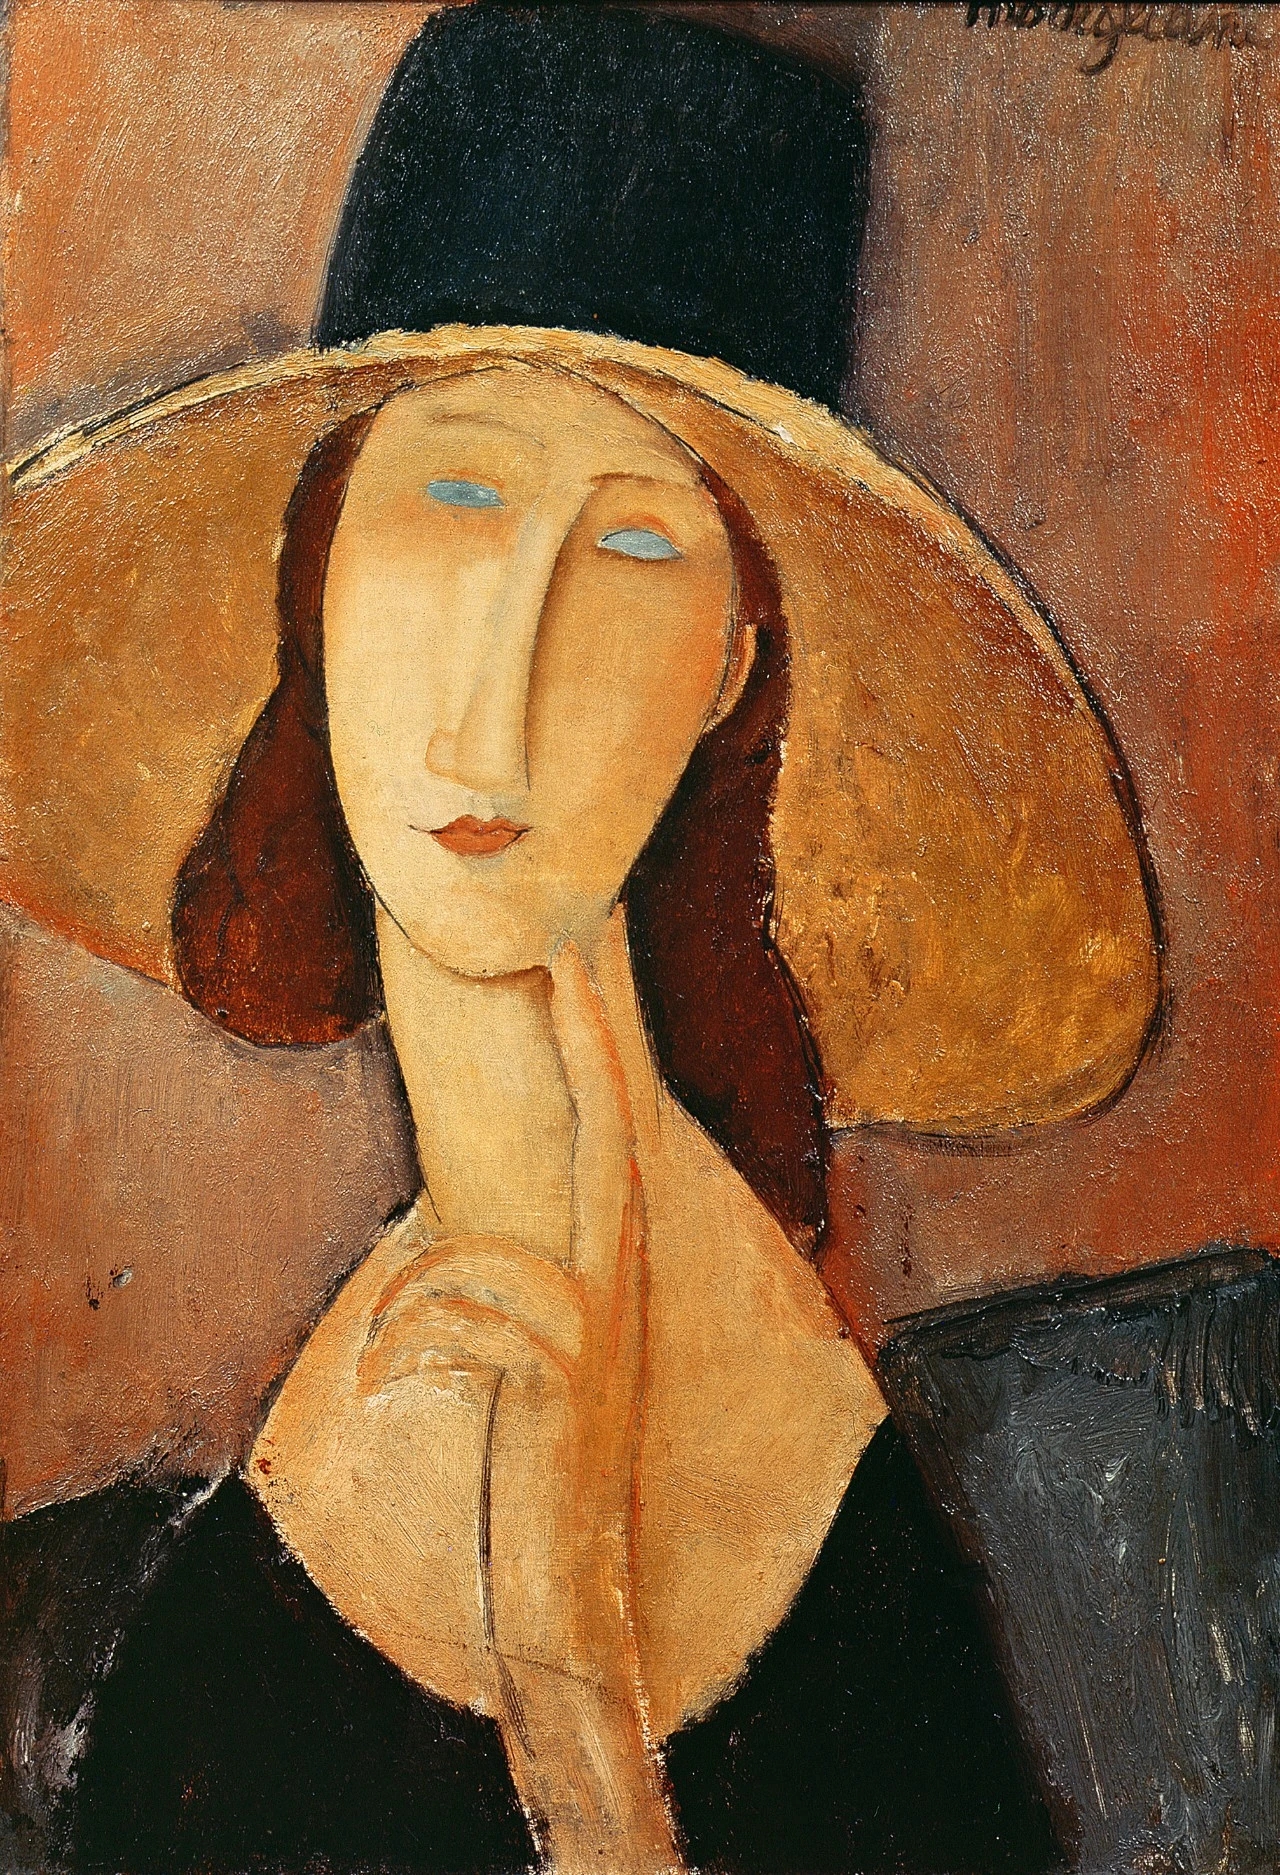 Jeanne Hébuterne with the Wide-Brimmed Hat